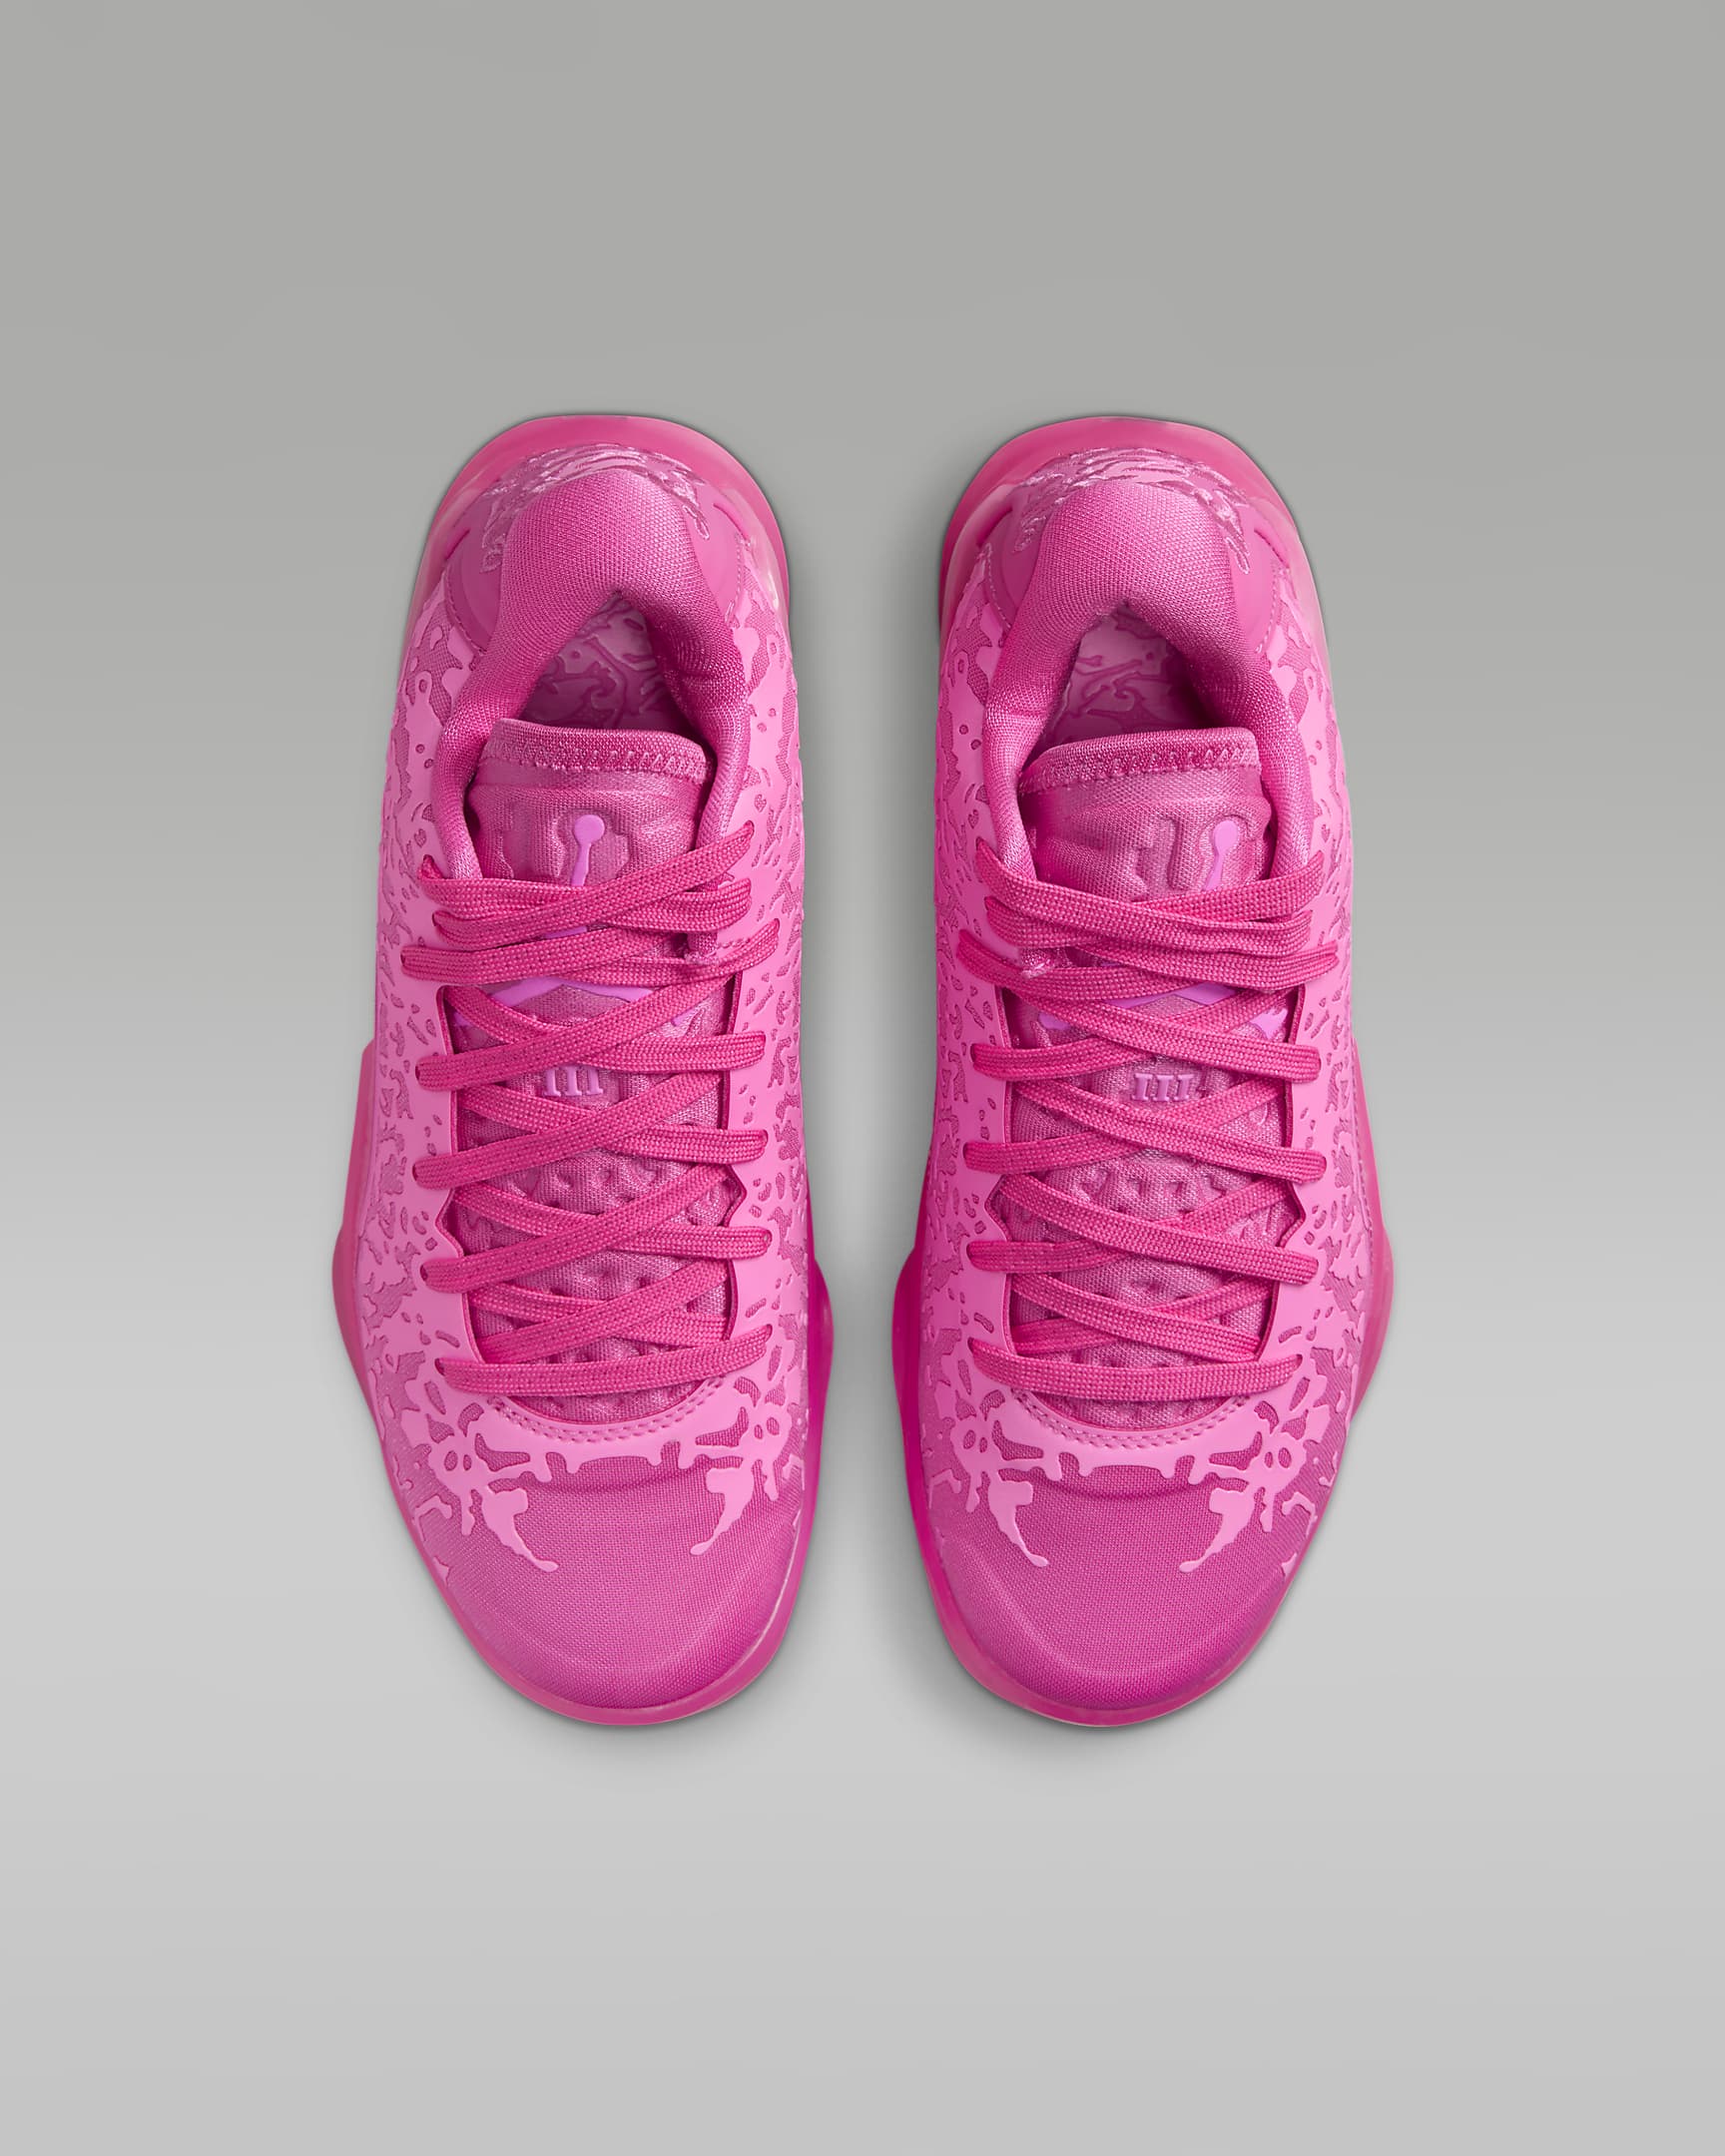 Zion 3 Older Kids' Basketball Shoes - Pinksicle/Pink Glow/Pink Spell